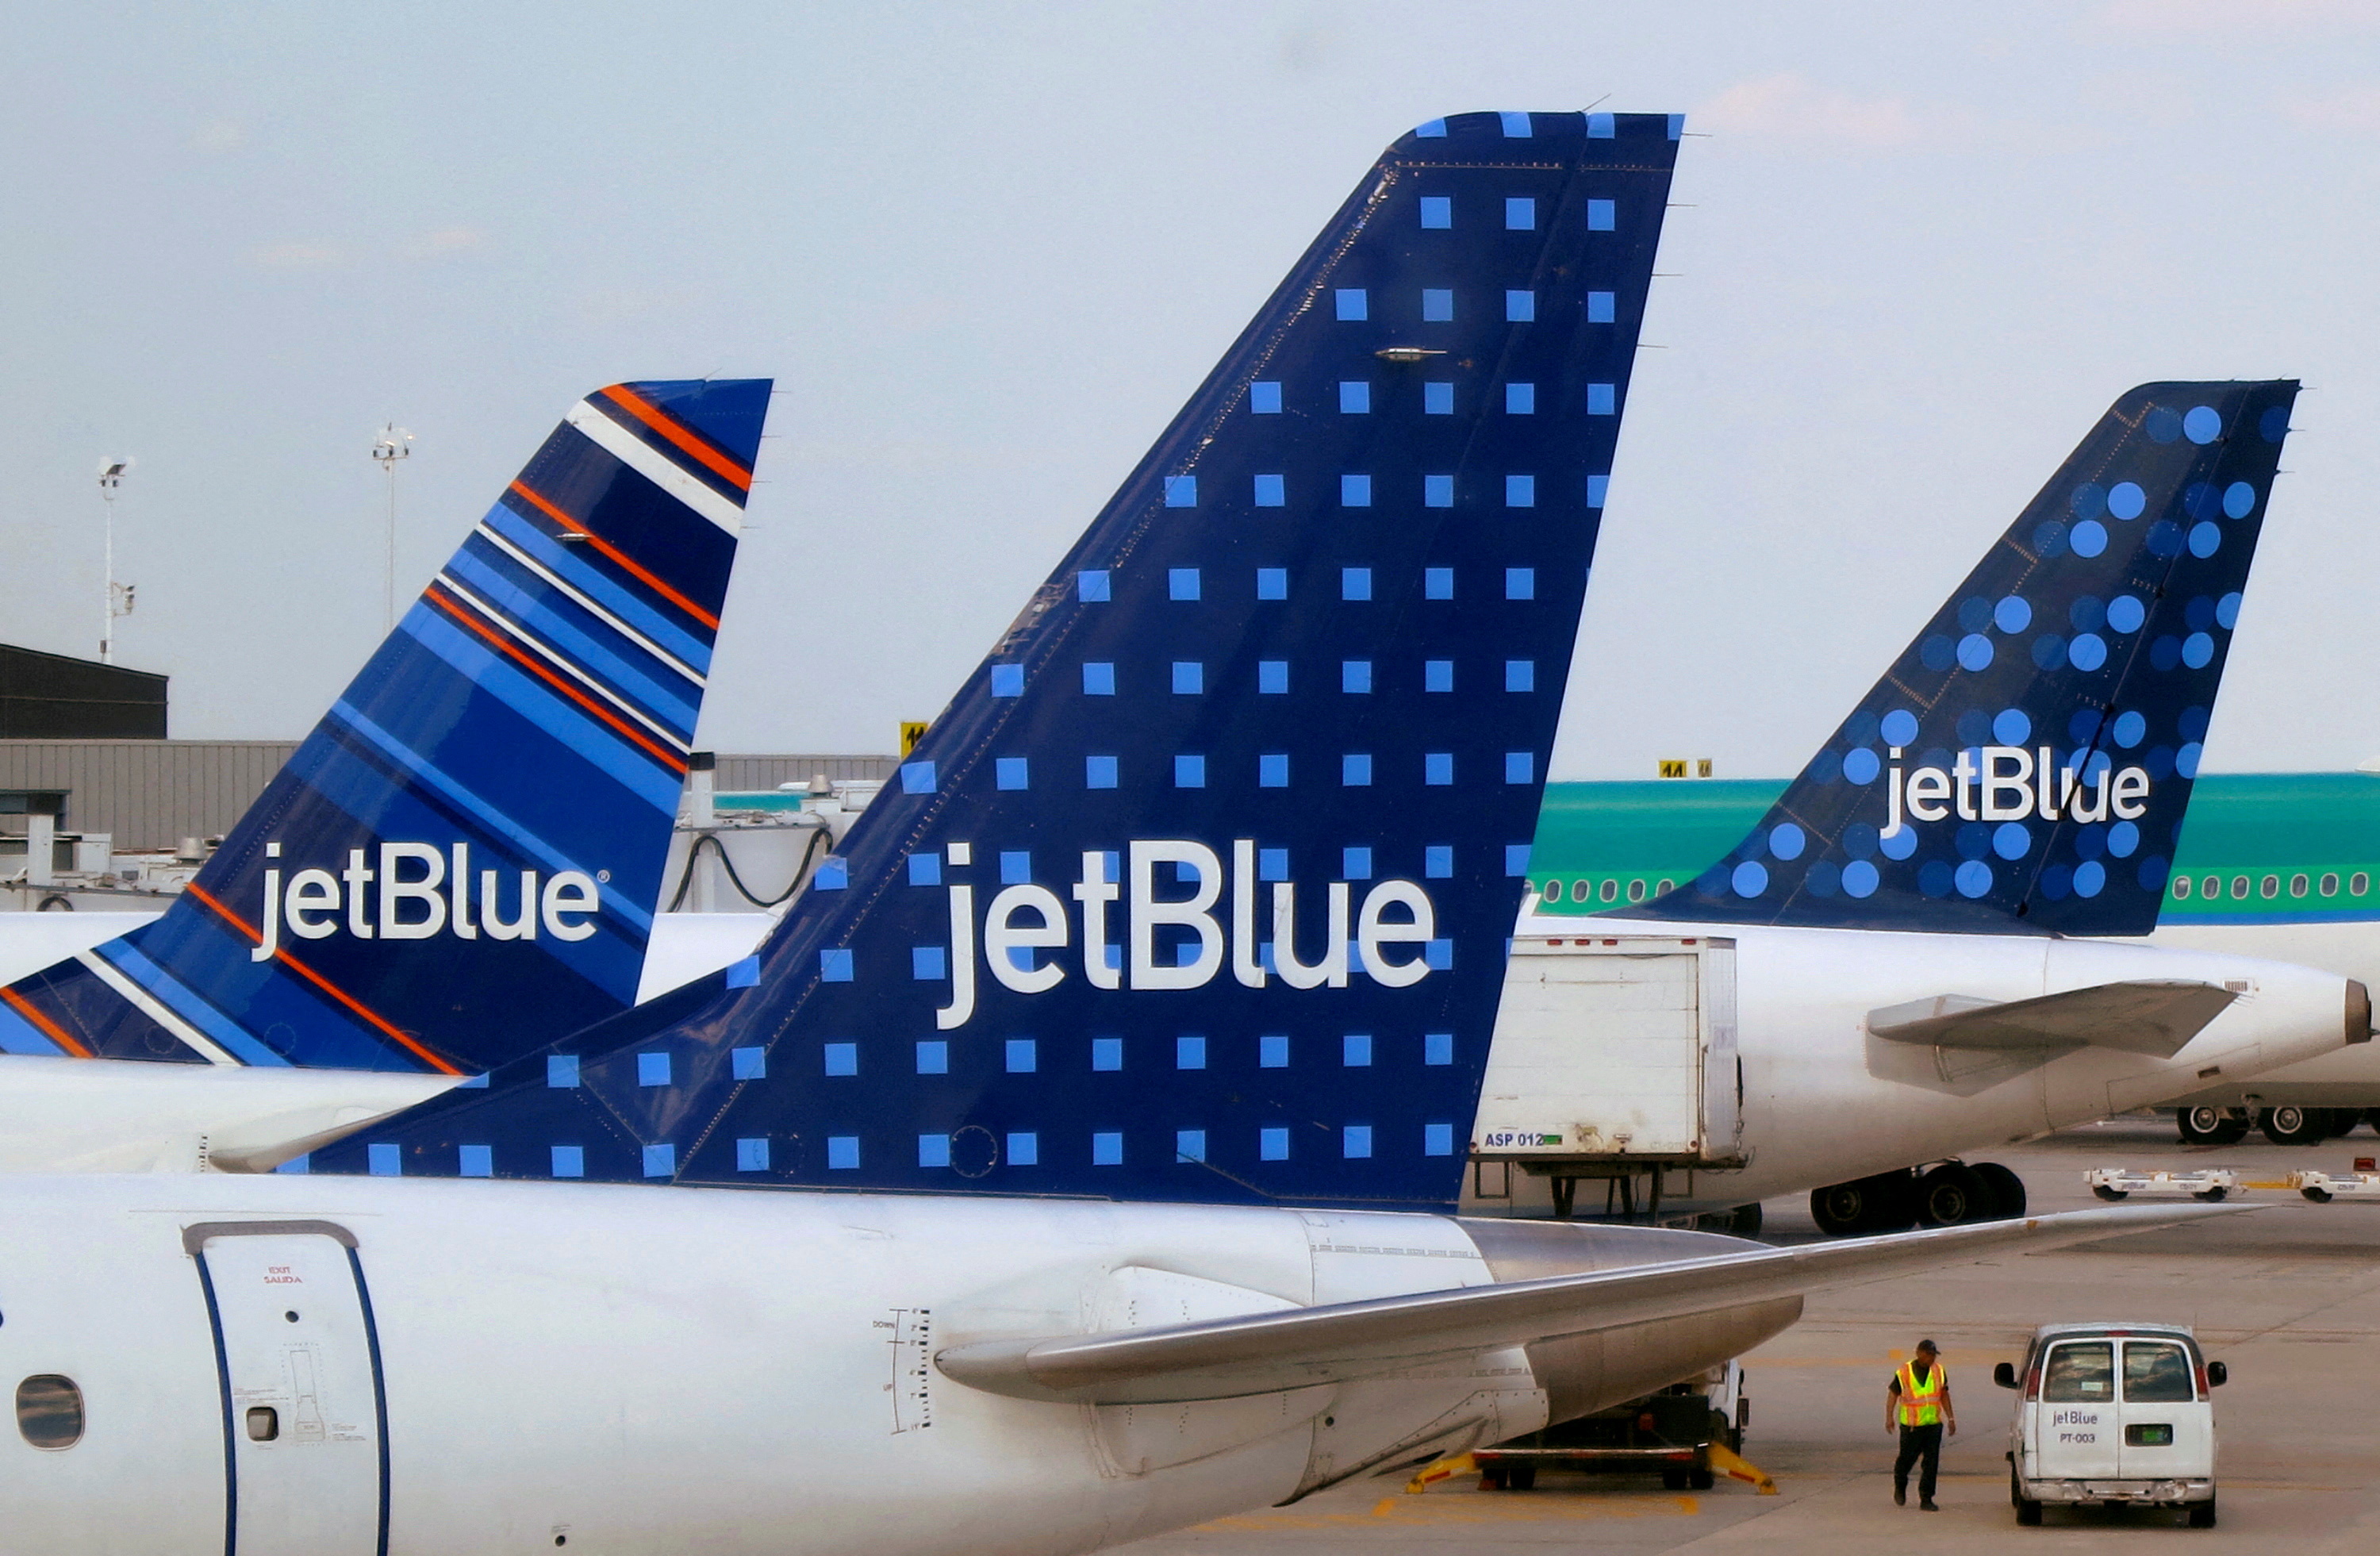 JetBlue Airways aircraft are pictured at departure gates at John F. Kennedy International Airport in New York